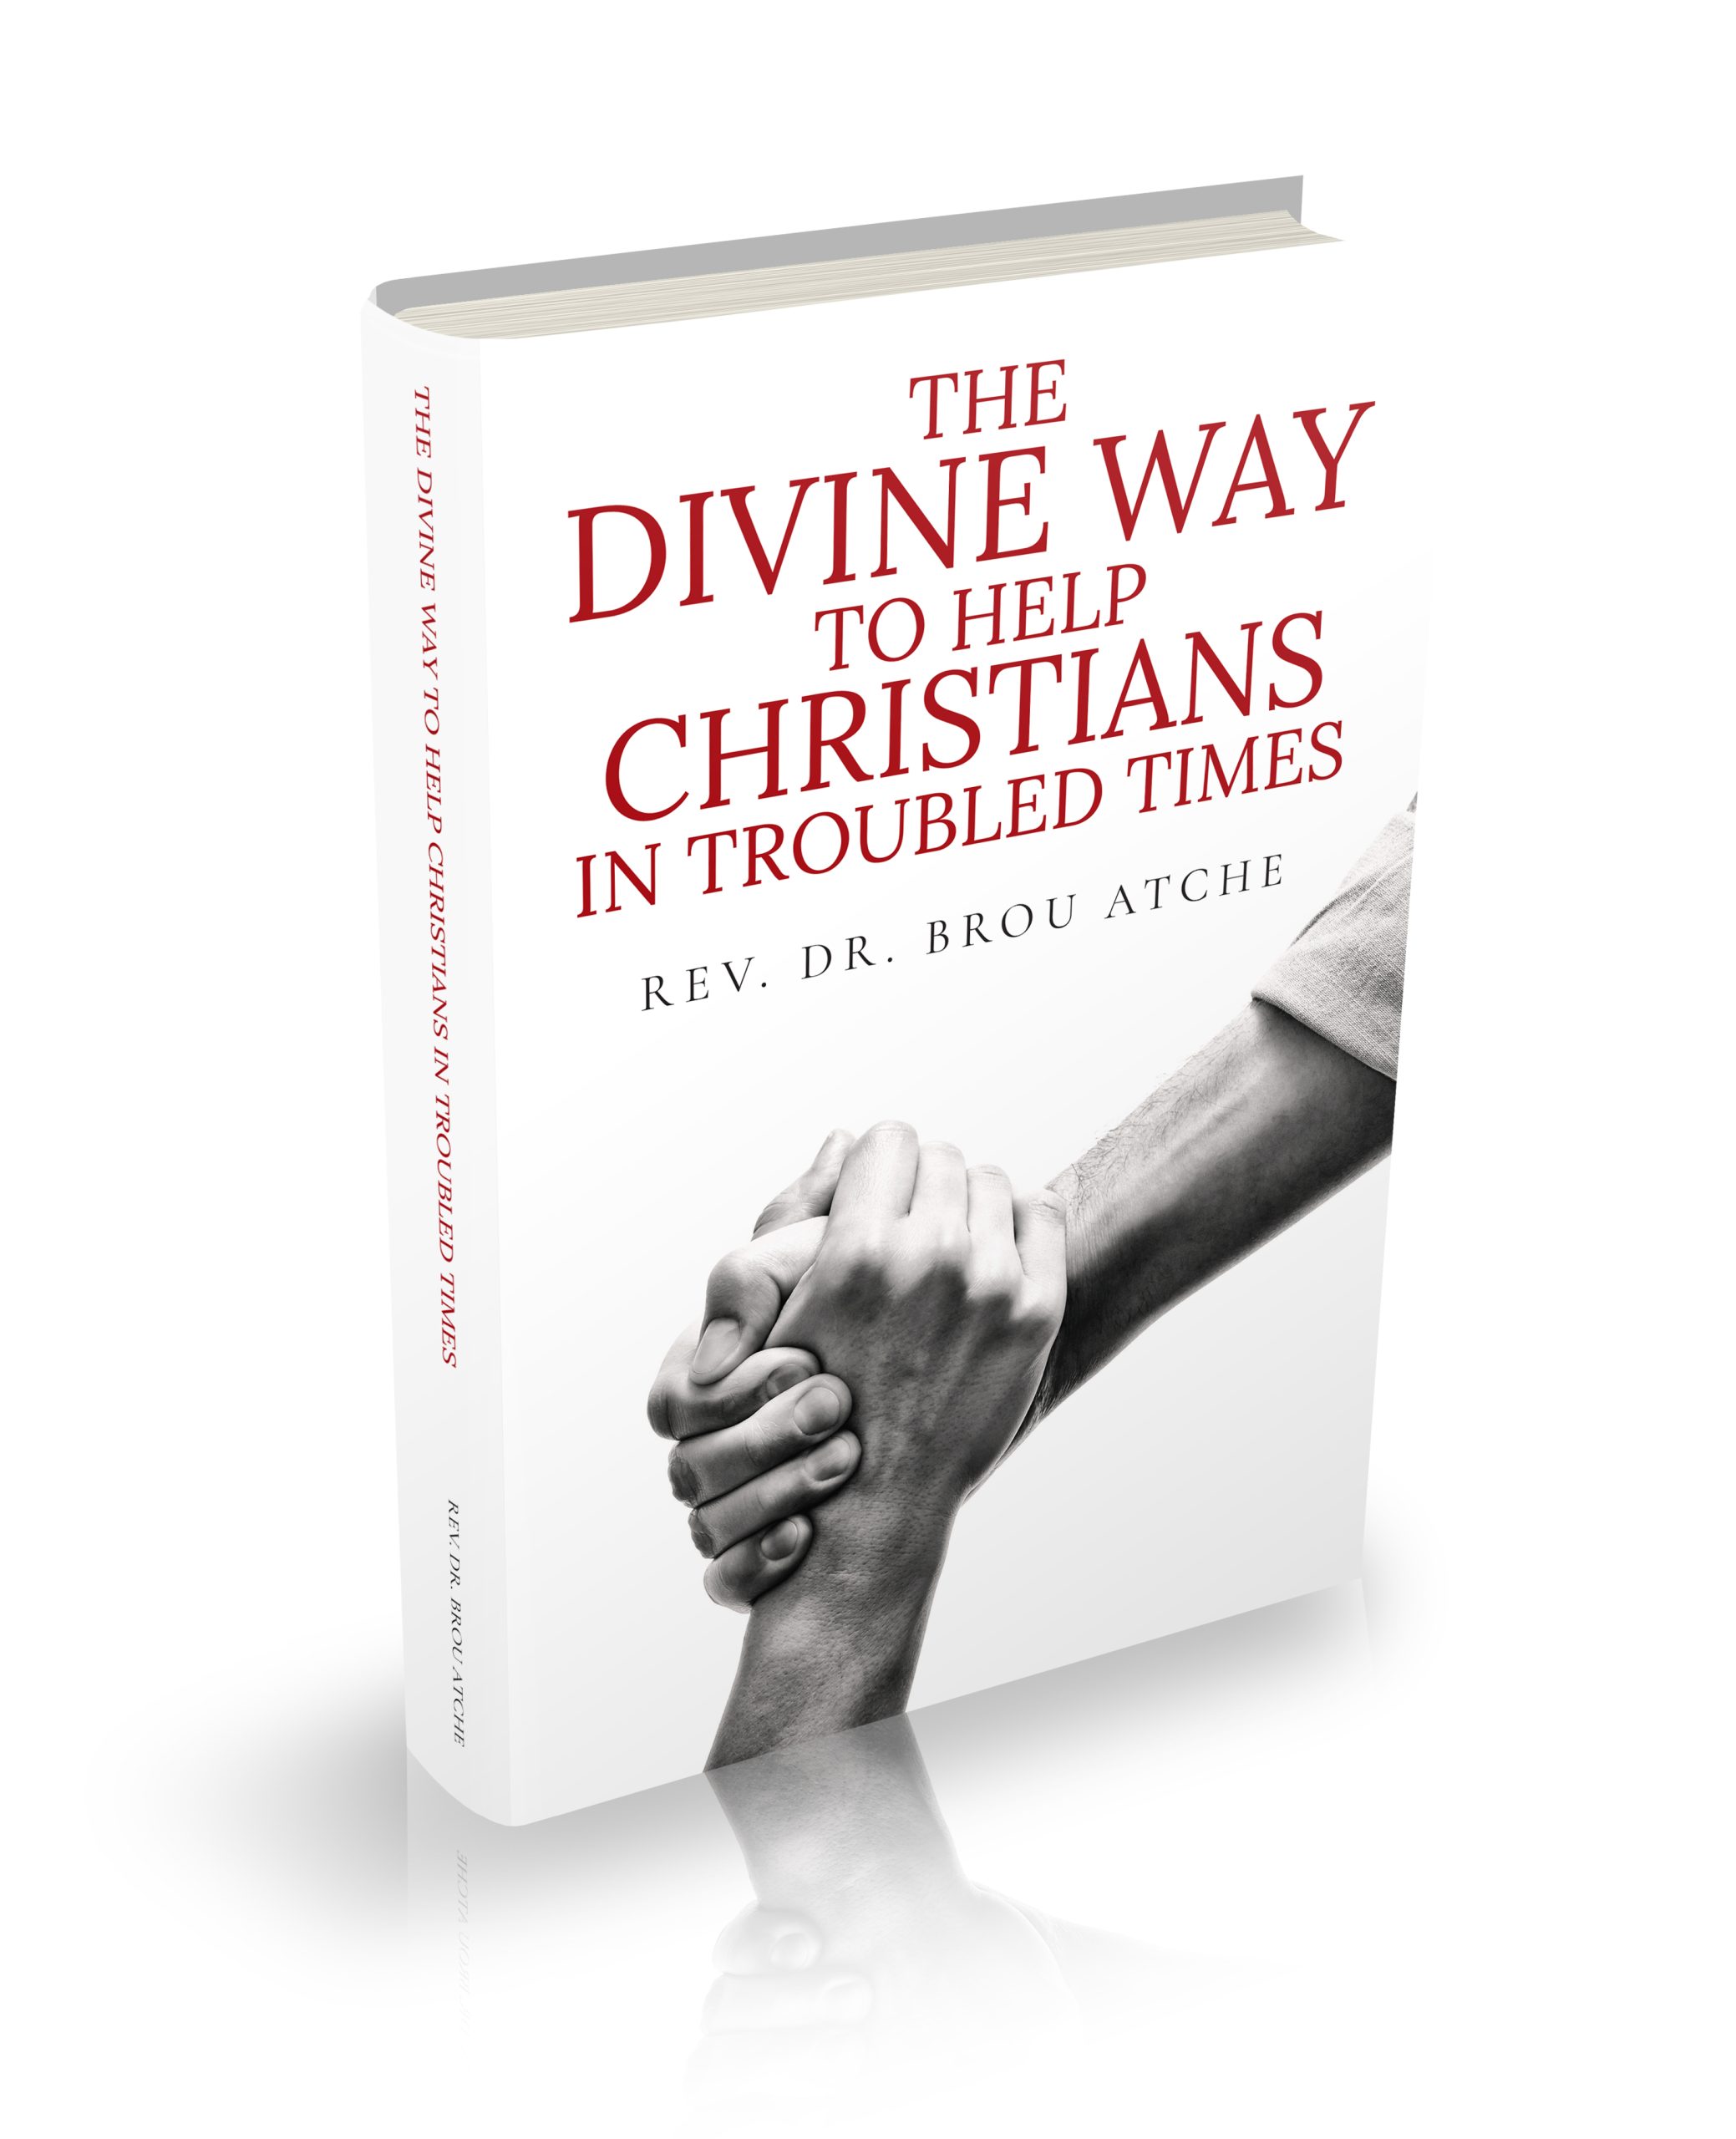 The Divine Way To Help Christians in Troubled Times_3D cover